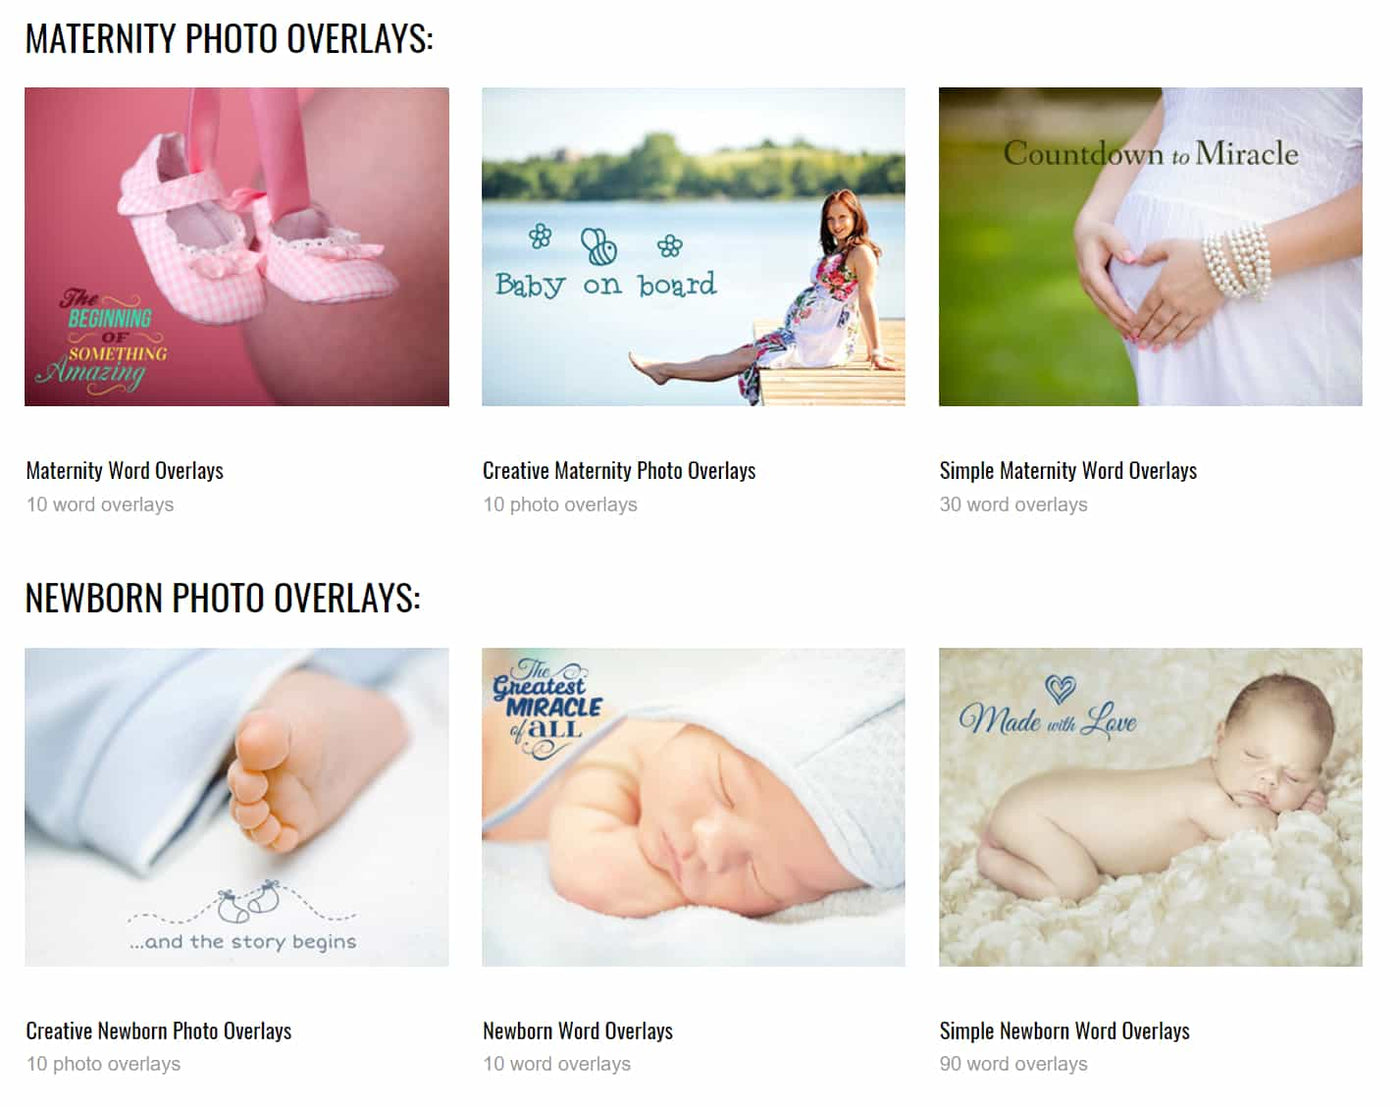 The Ultimate Photography Bundle - 3300+ Resources - Artixty